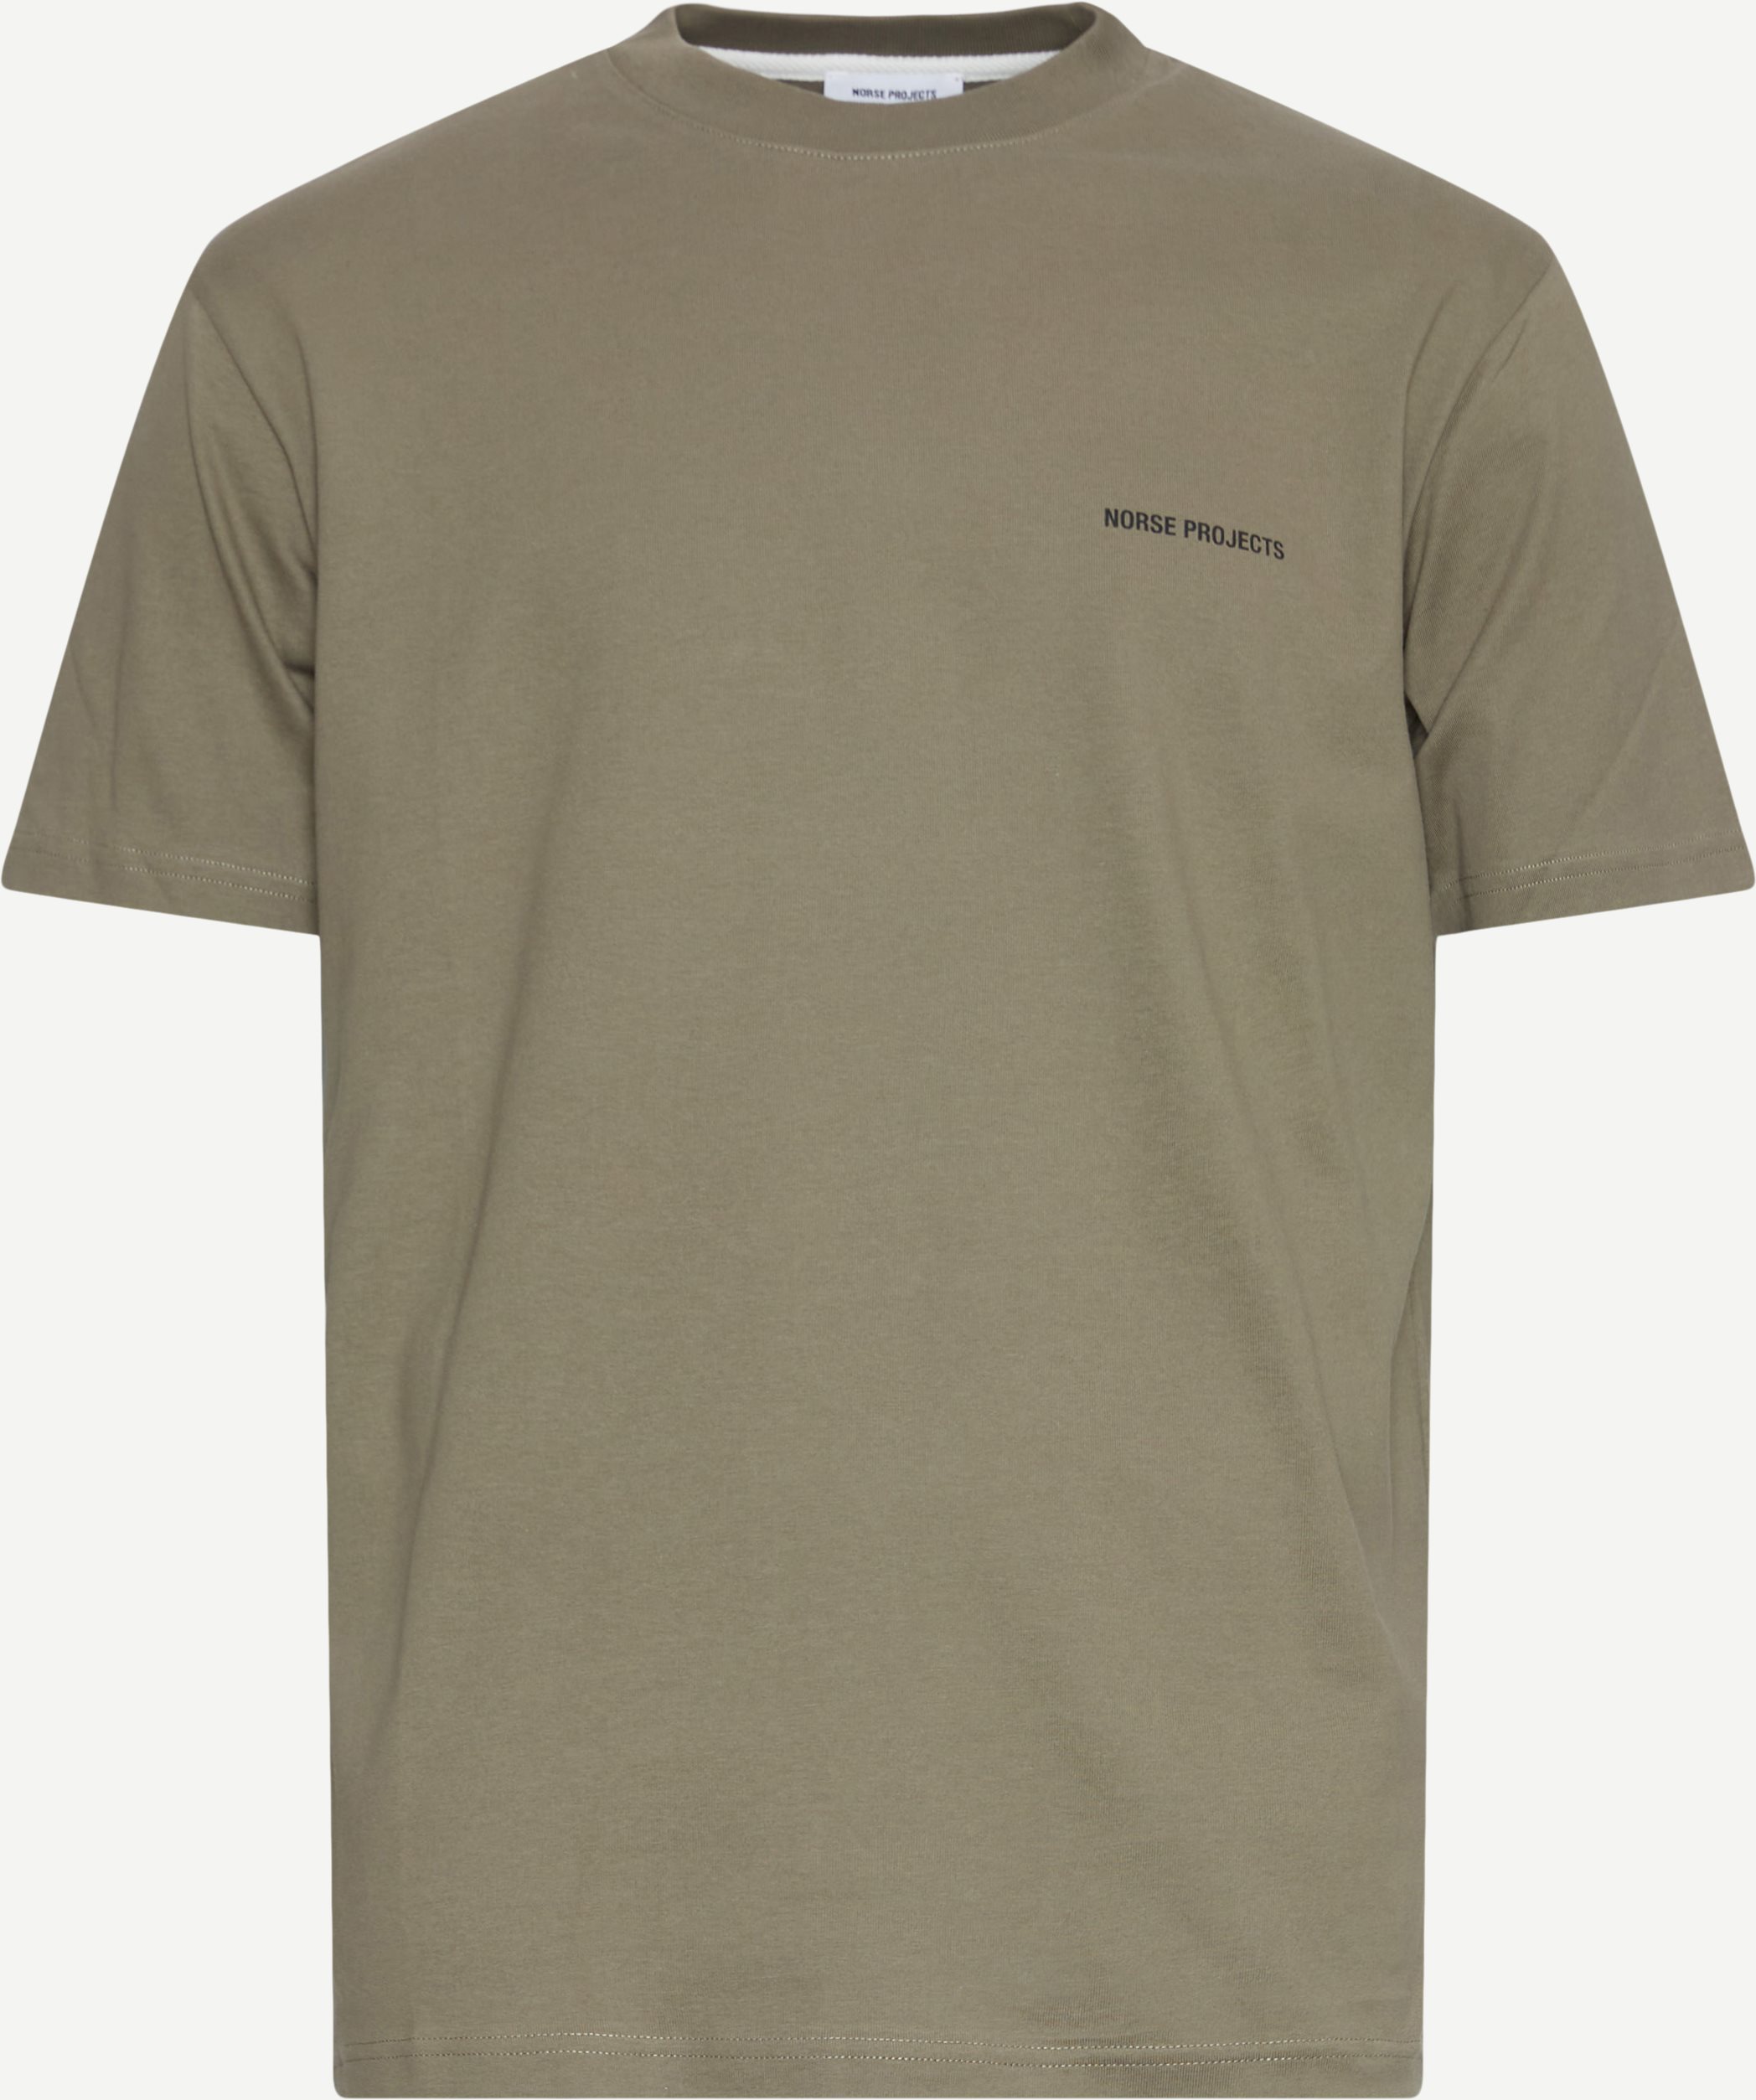 Norse Projects T-shirts JOHANNES ORGANIC LOGO T-SHIRT N01-0606 Army